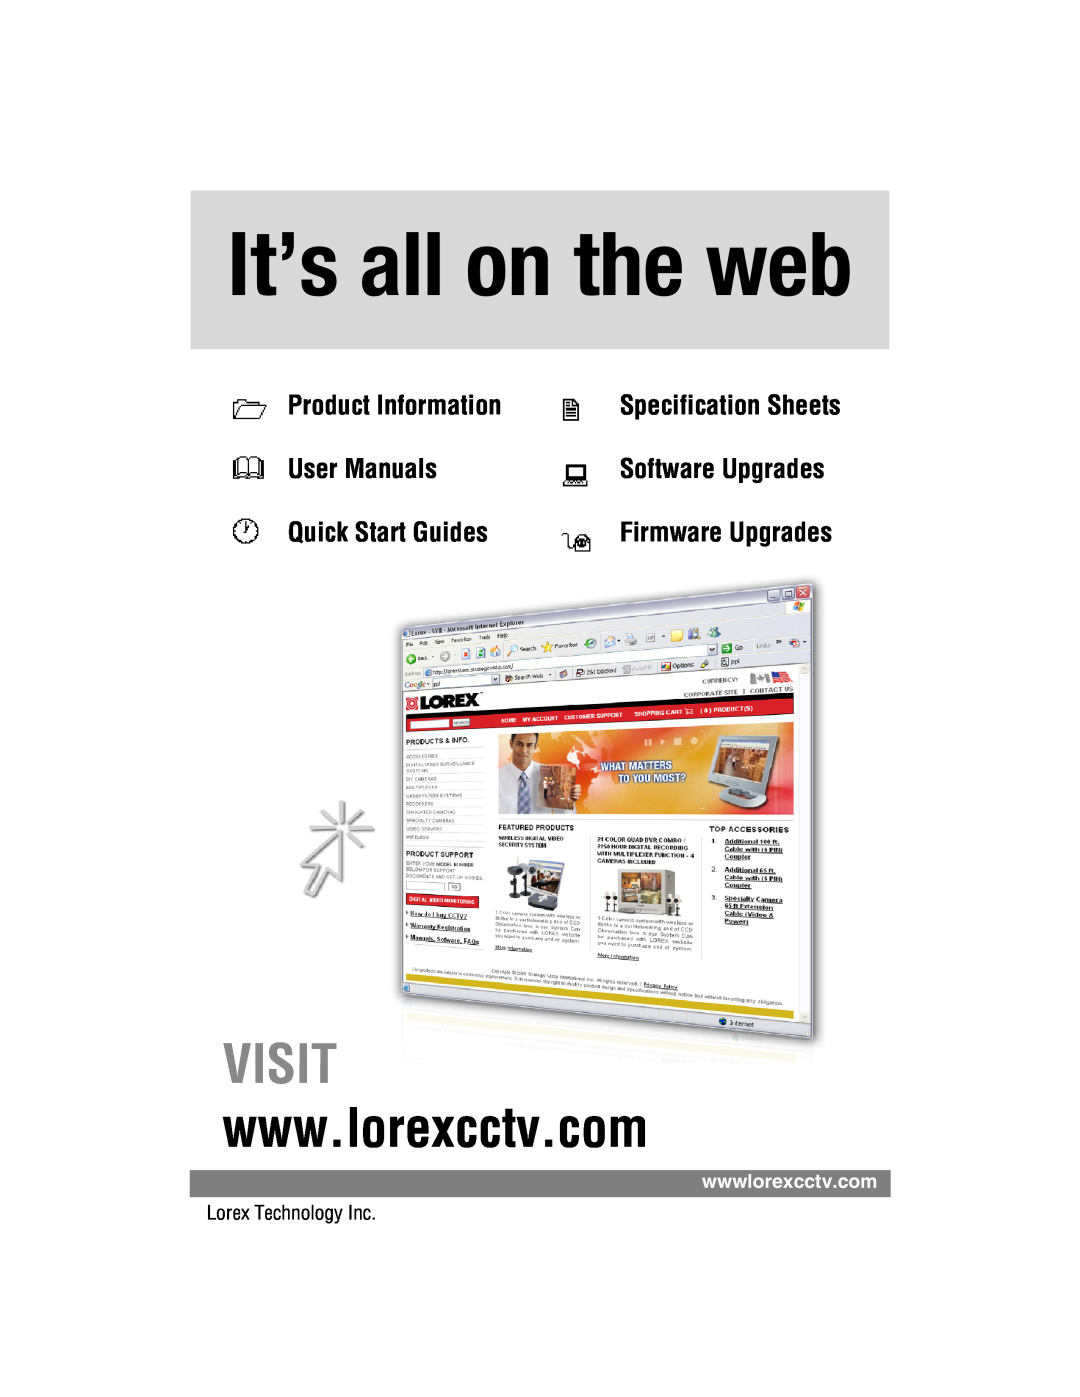 LOREX Technology L15D400 It’s all on the web, Visit, Product Information, Quick Start Guides, Software Upgrades 